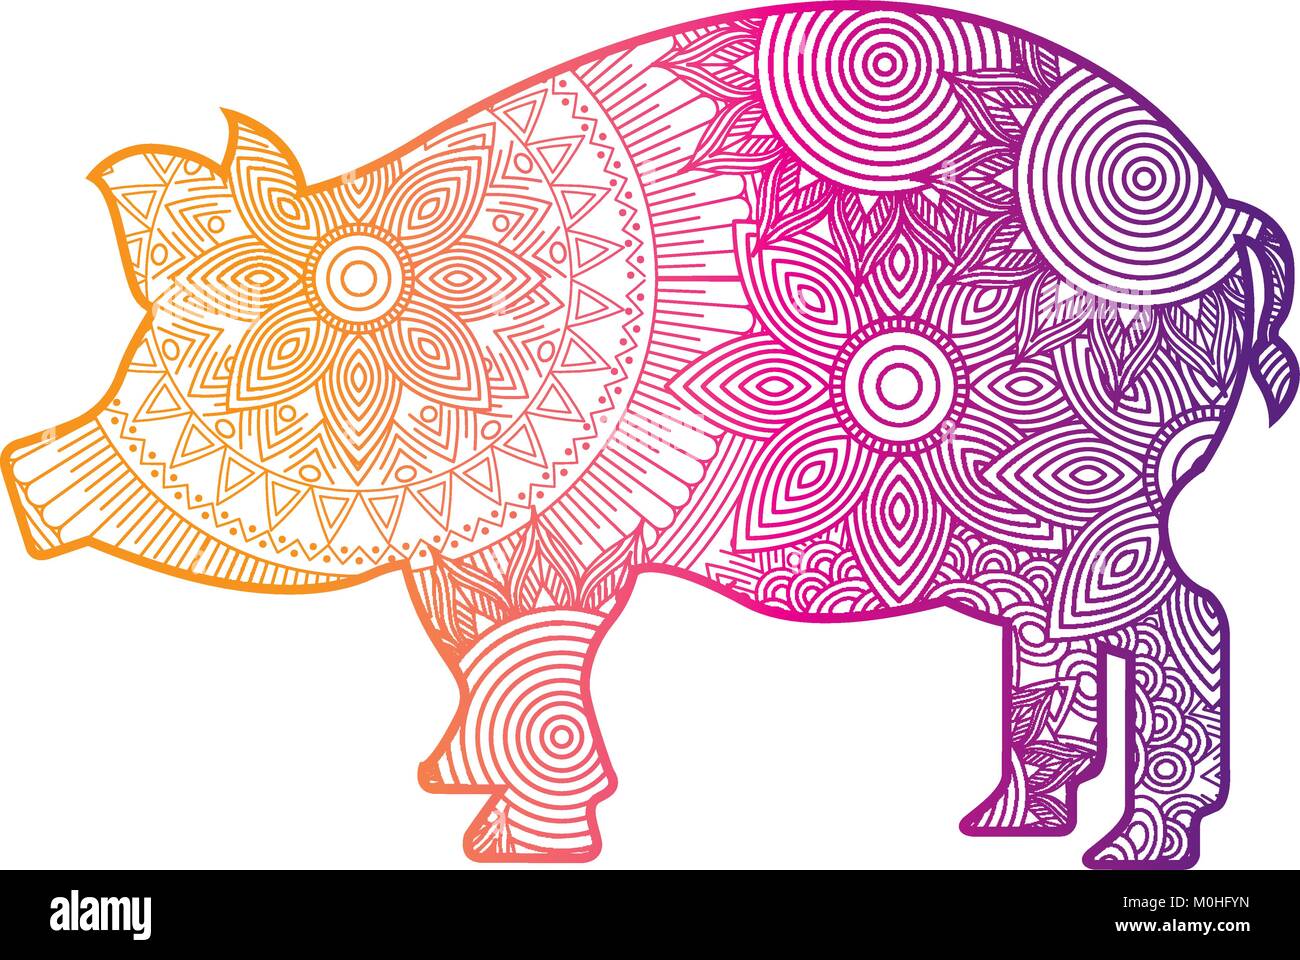 hand drawn for adult coloring pages with pig zentangle  Stock Vector